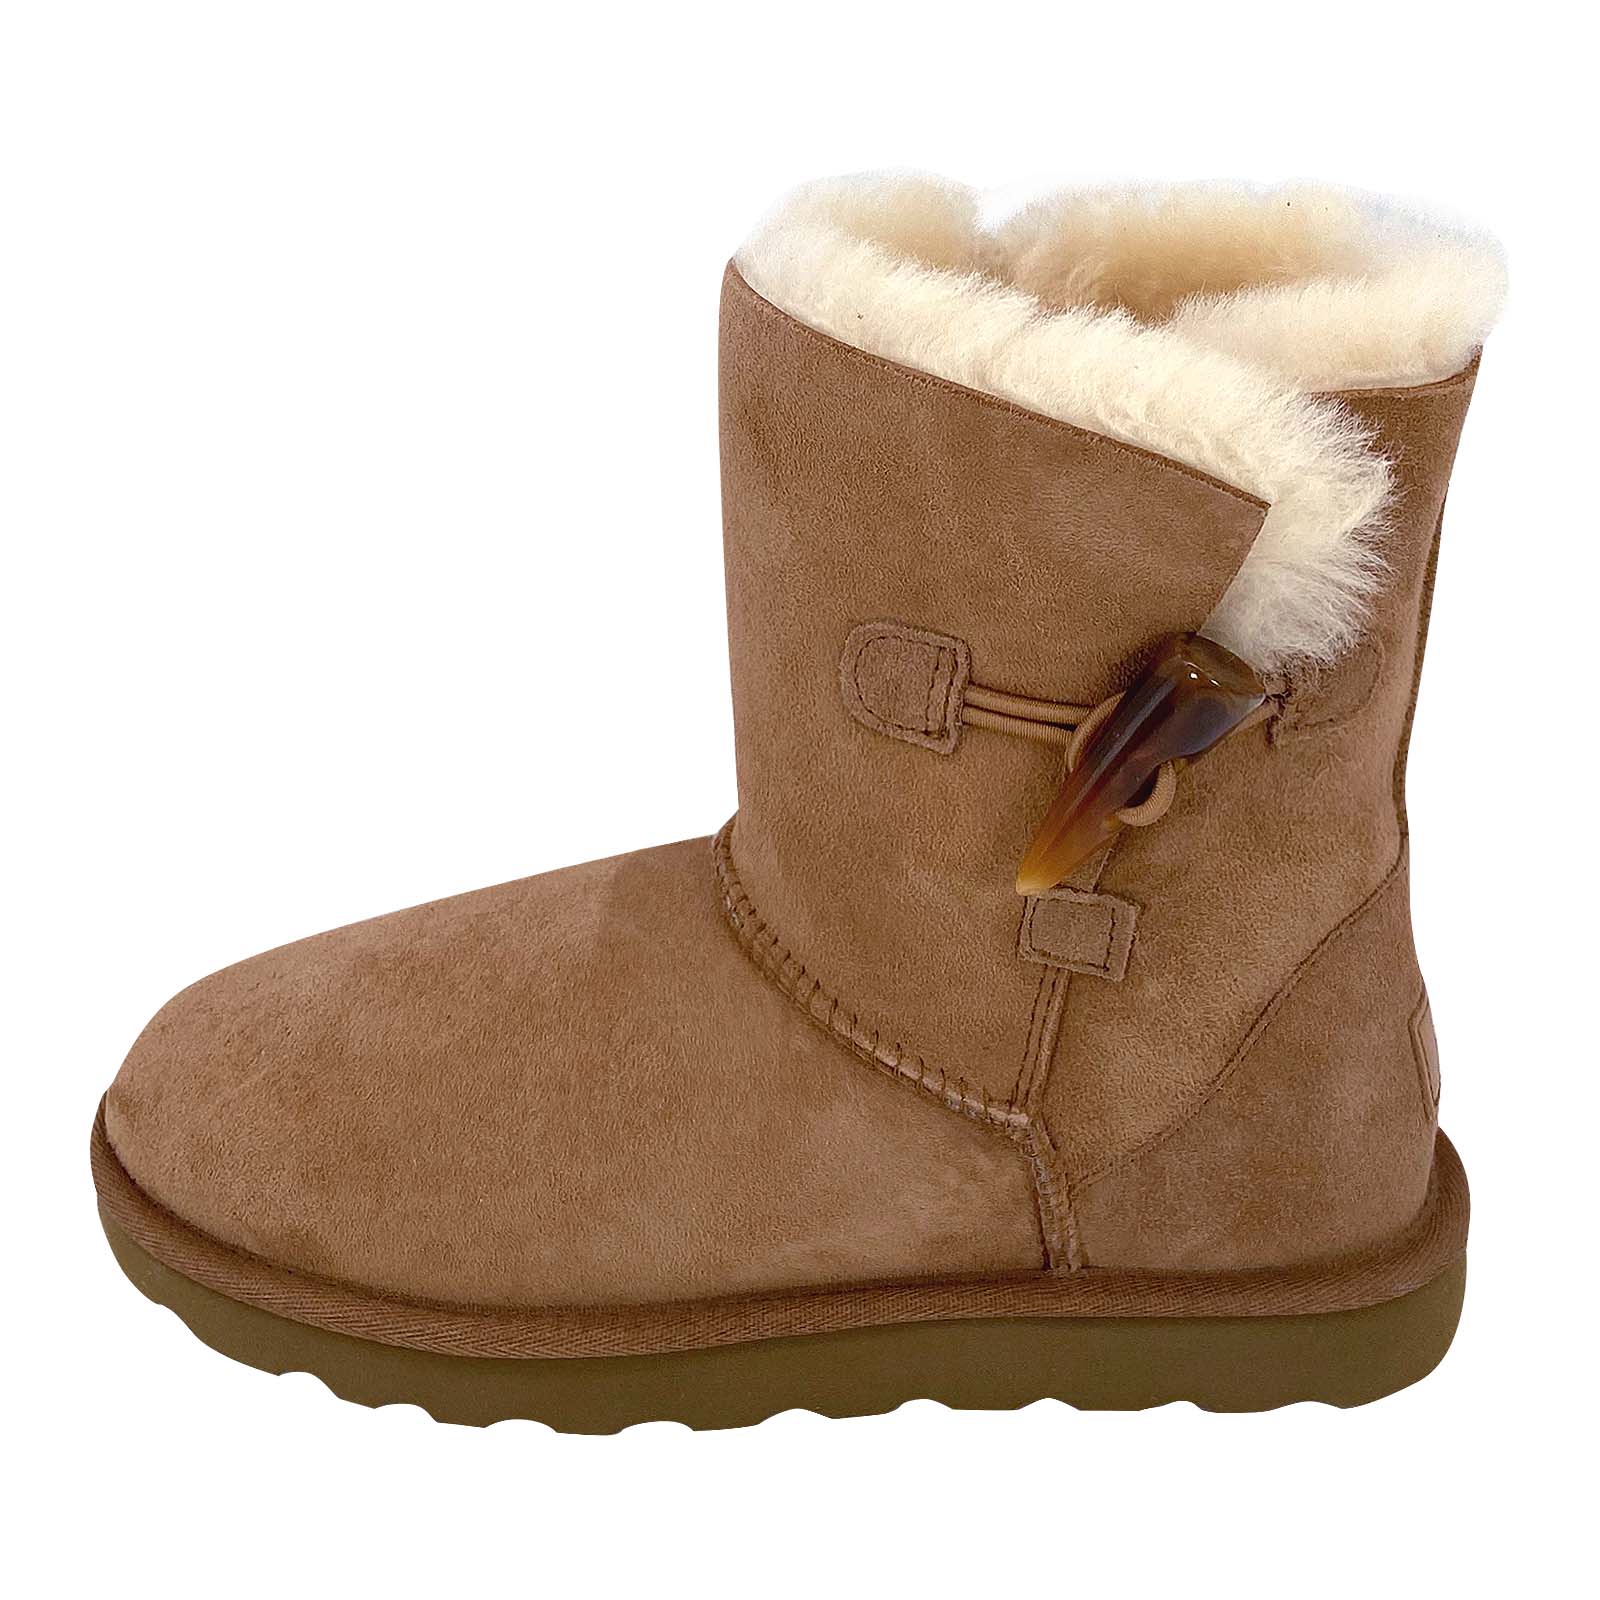 40078 - UGG shearling-trim leather boots Brown, Hey Dude Wendy Sox Stone  Women's Casual Shoe White